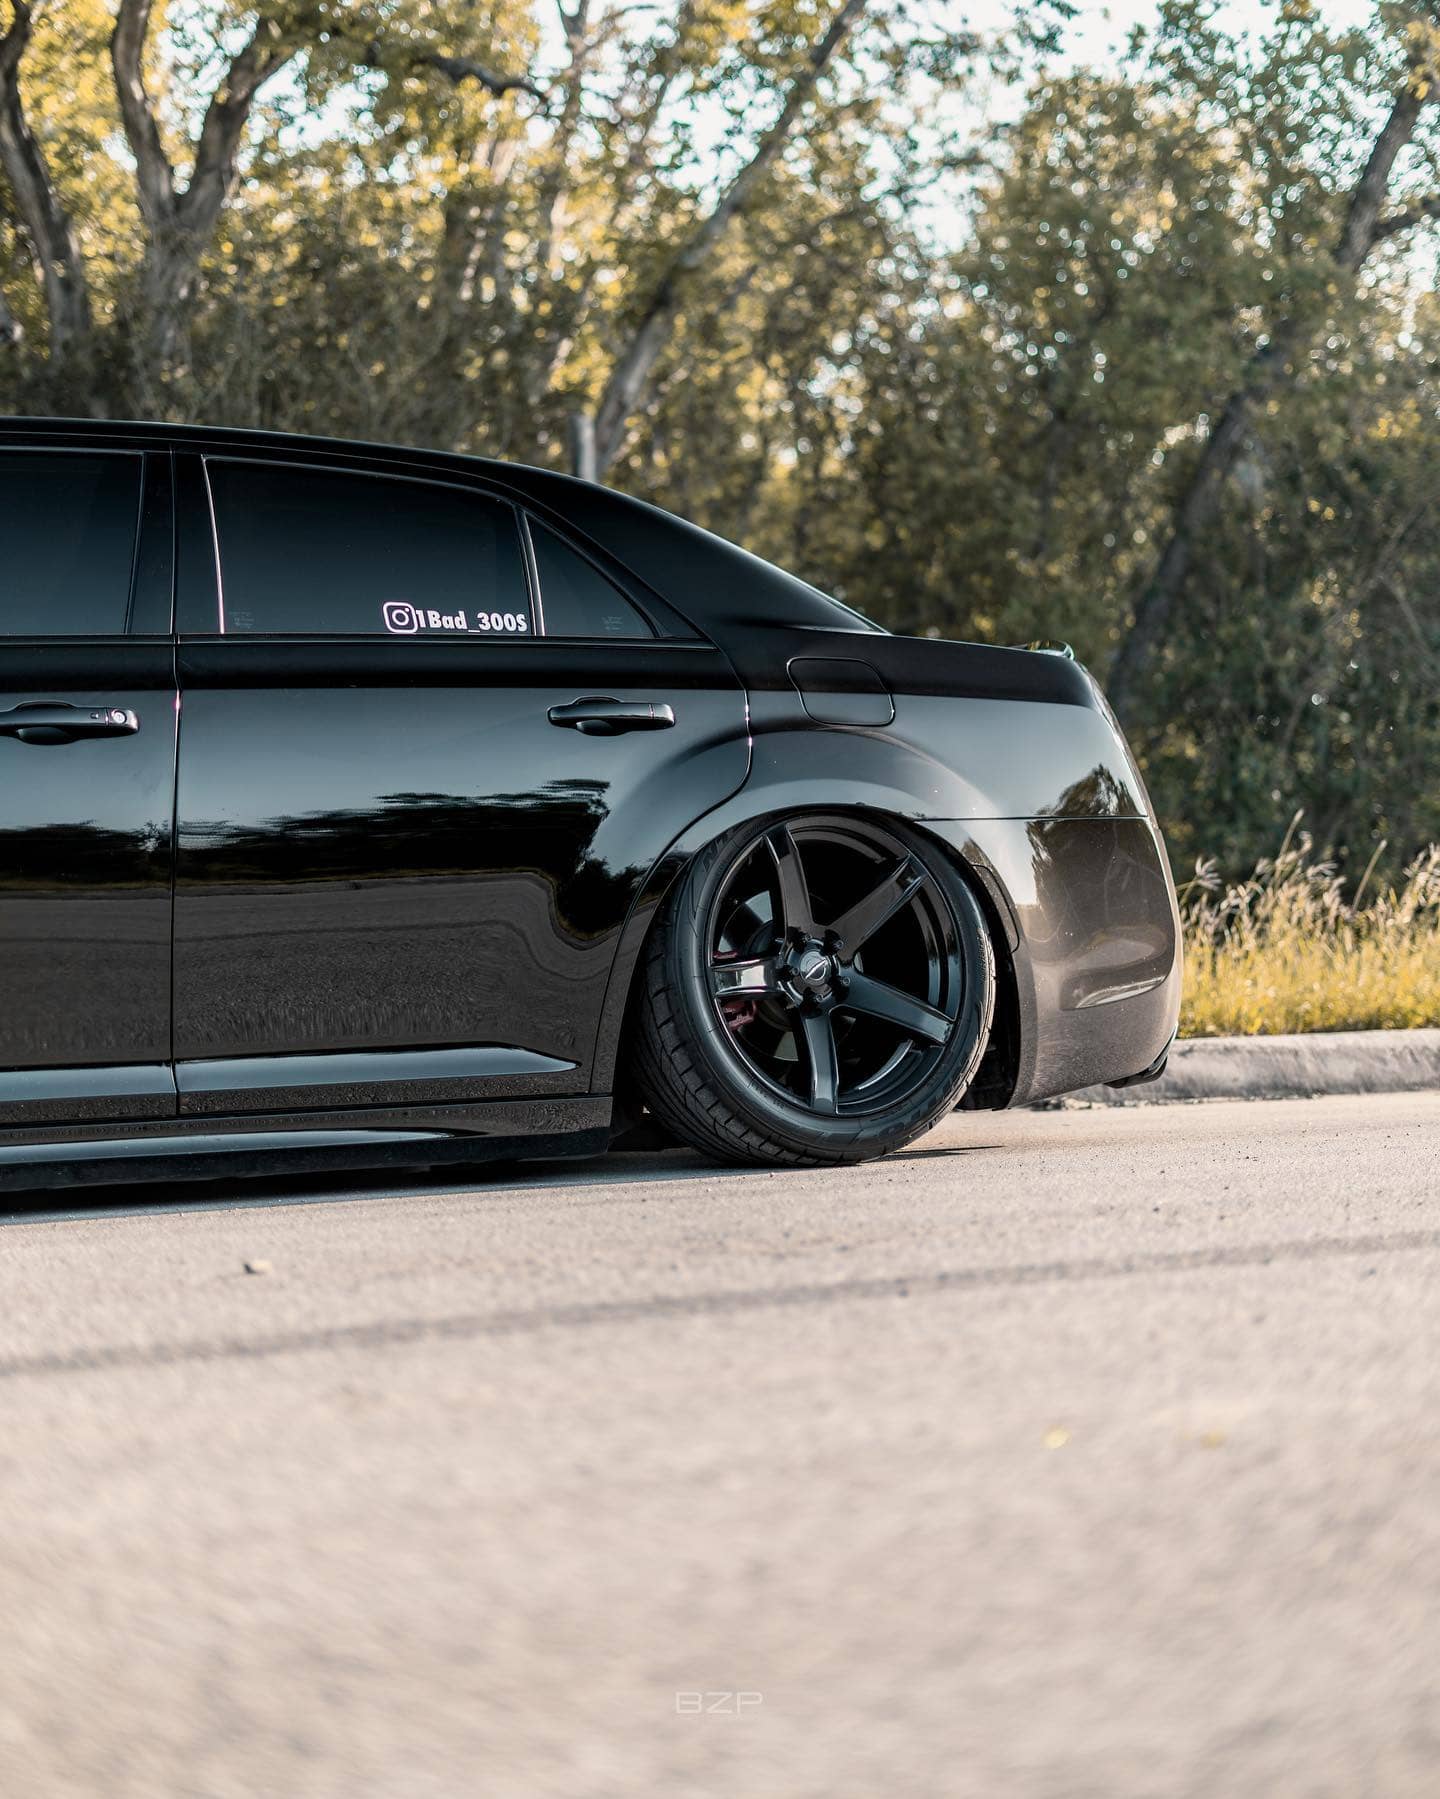 Bagged Chrysler 300 s with rear camber